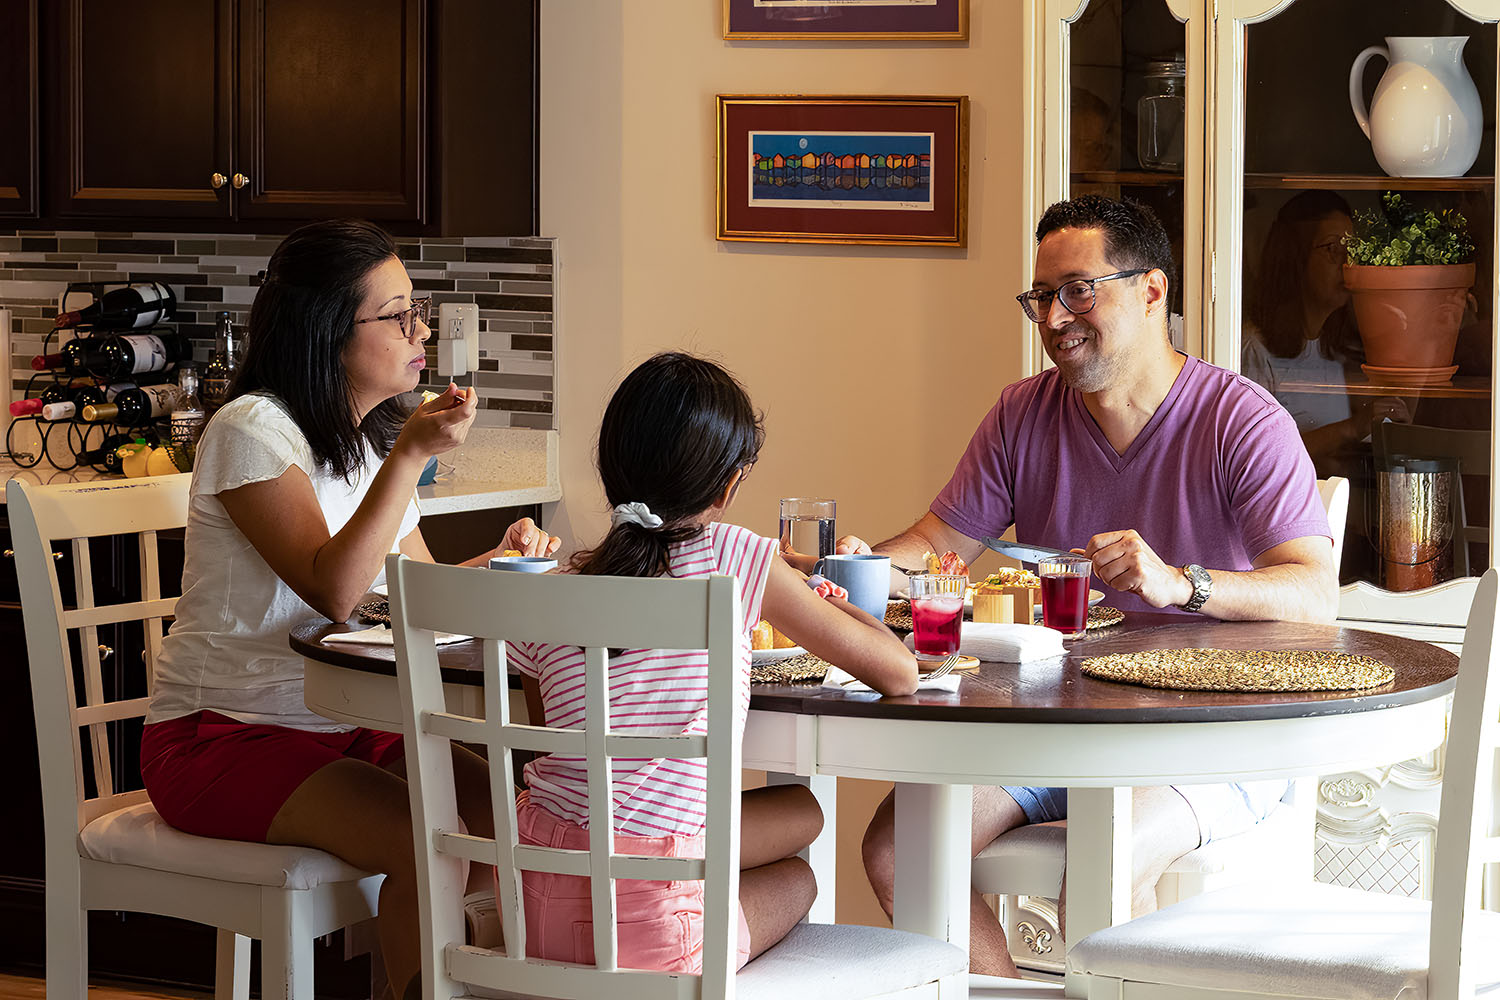 Roberto Rodriguez and his family sharing a meal together